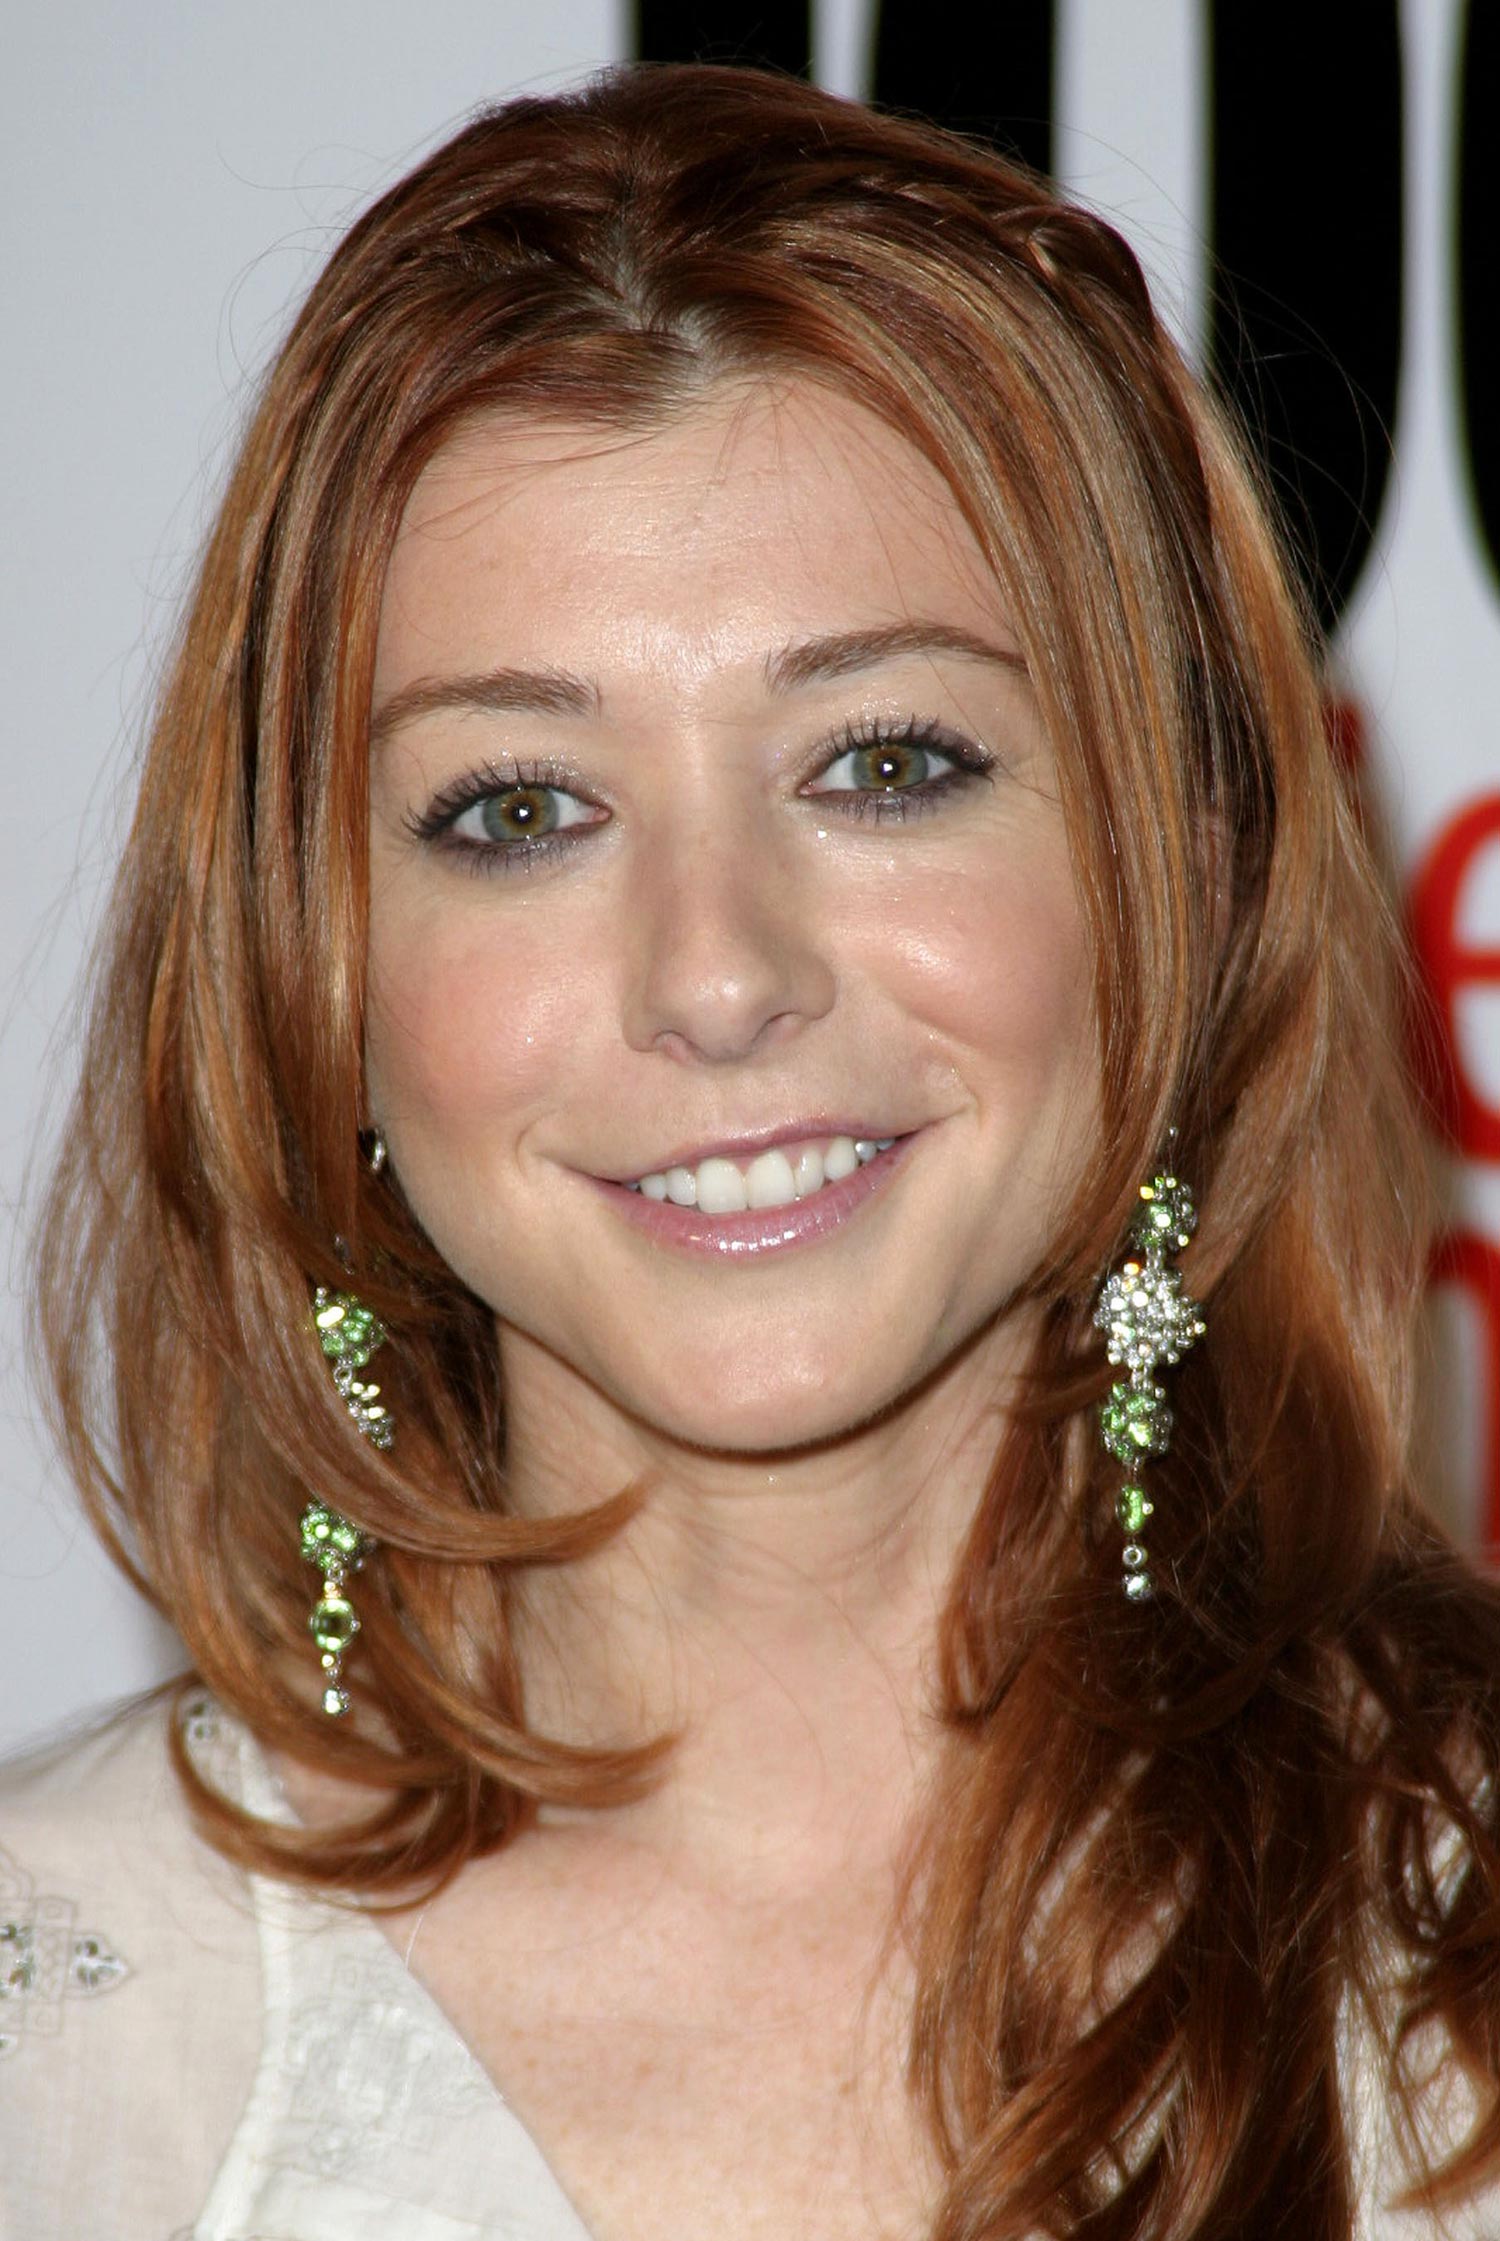 alyson-hannigan-FHM-sexiest-party-of-the-year-hq-08-1500.jpg